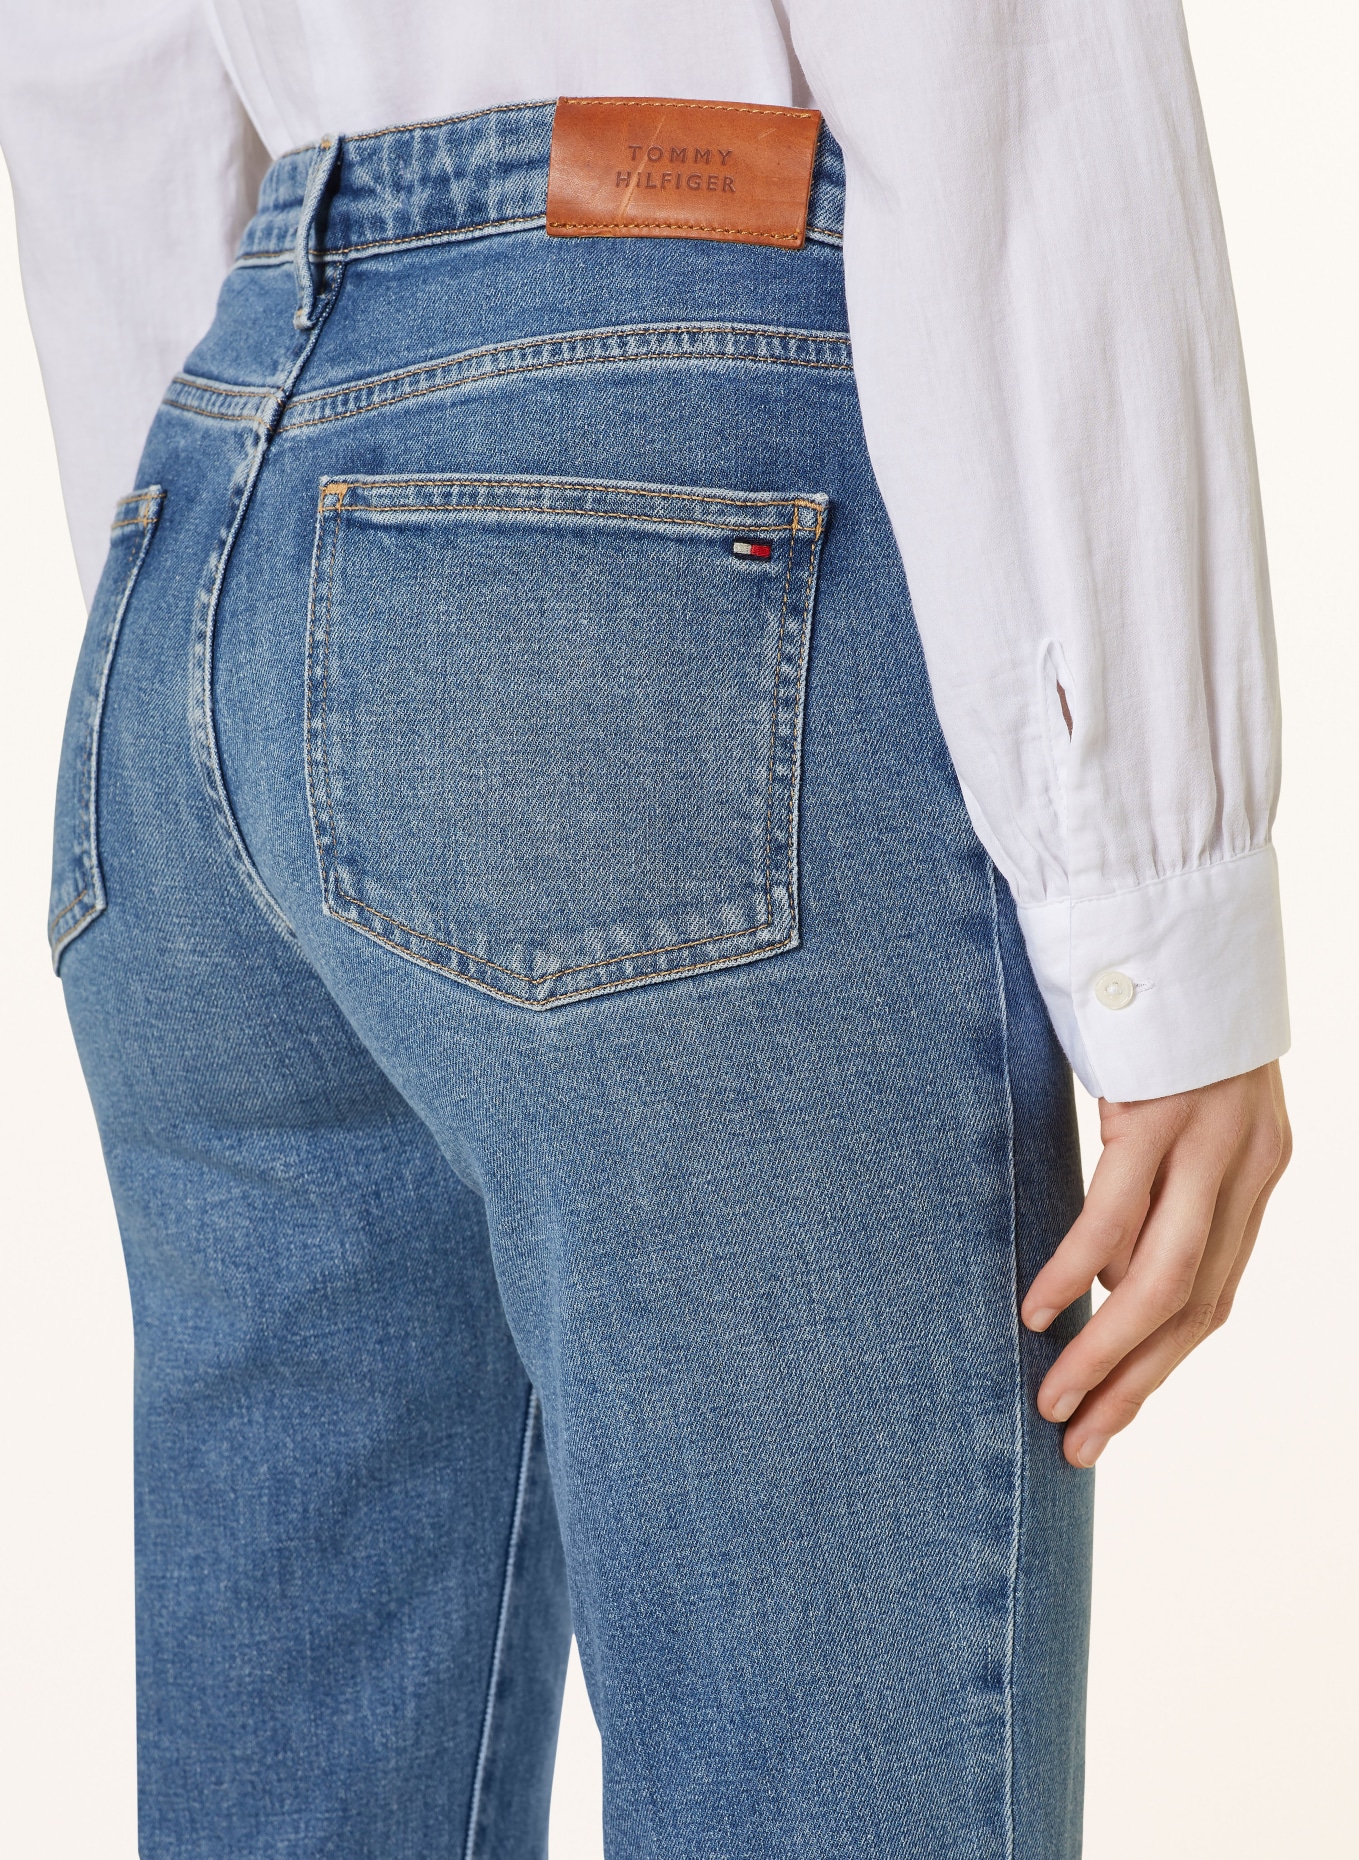 HILFIGER mel TOMMY 1a8 Bootcut Jeans in